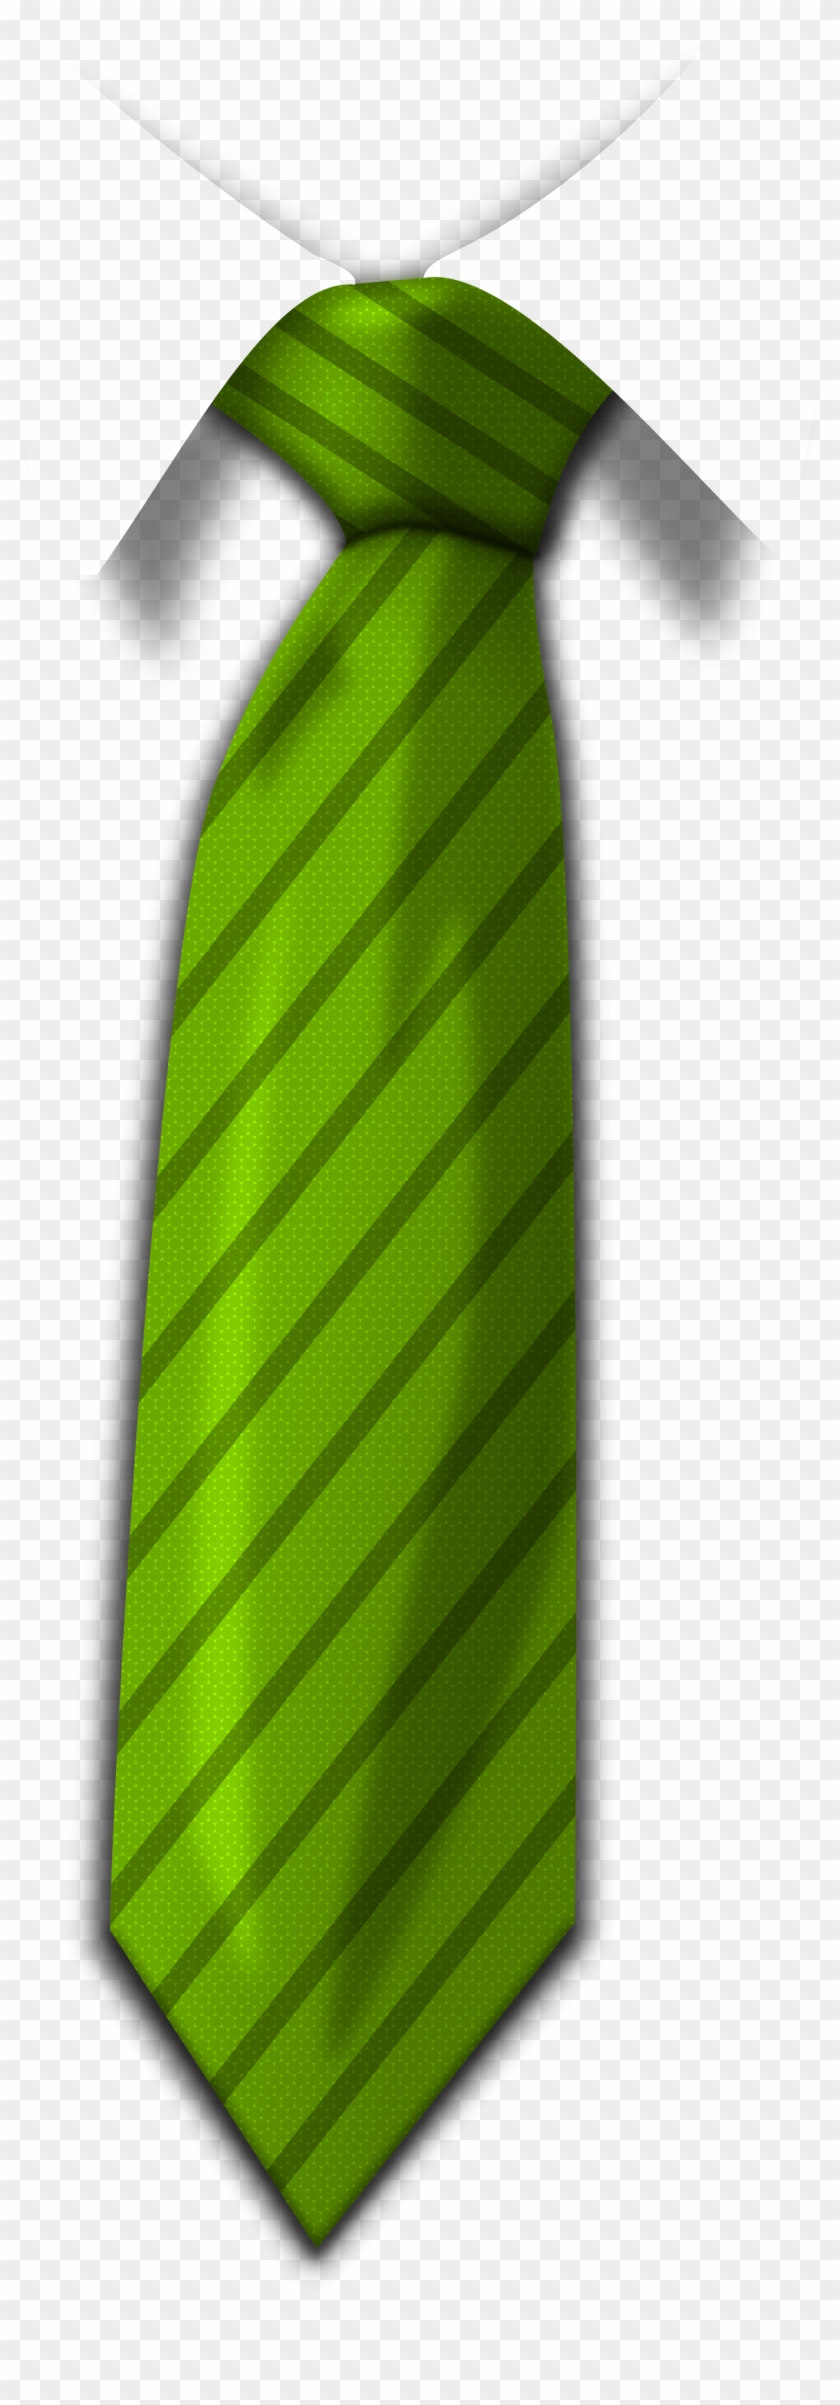 Green Tie Png Image - Corbata Verde Png Clipart (#995805) - PikPng